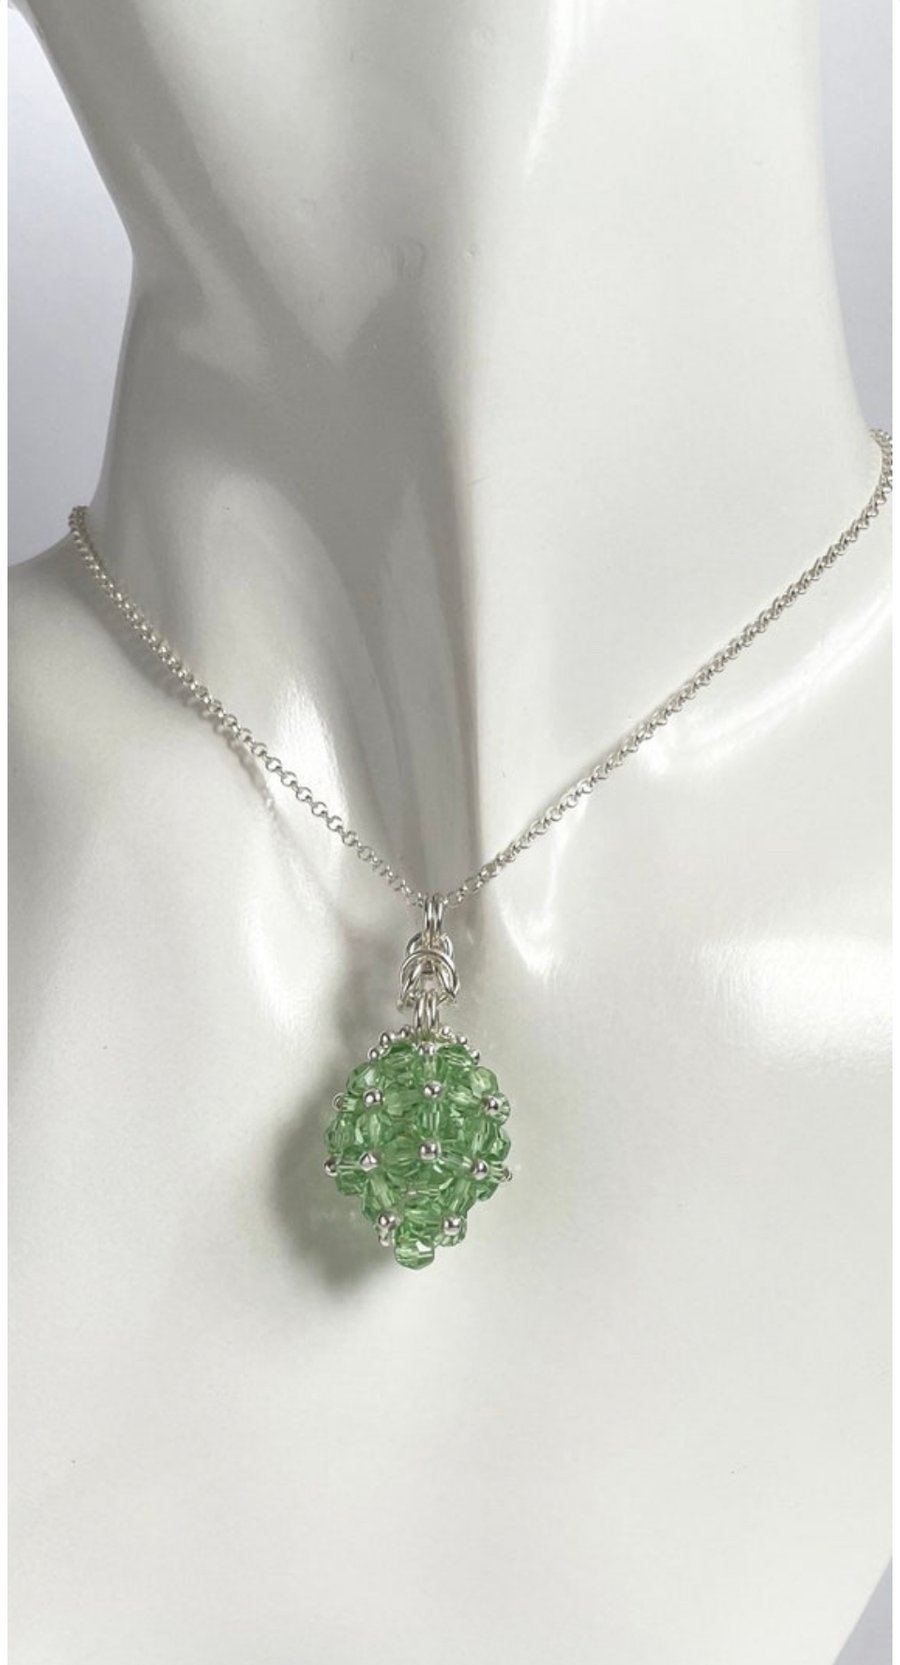 Crystal Green Egg Sterling Silver Pendant, with an 18 Inch Chain